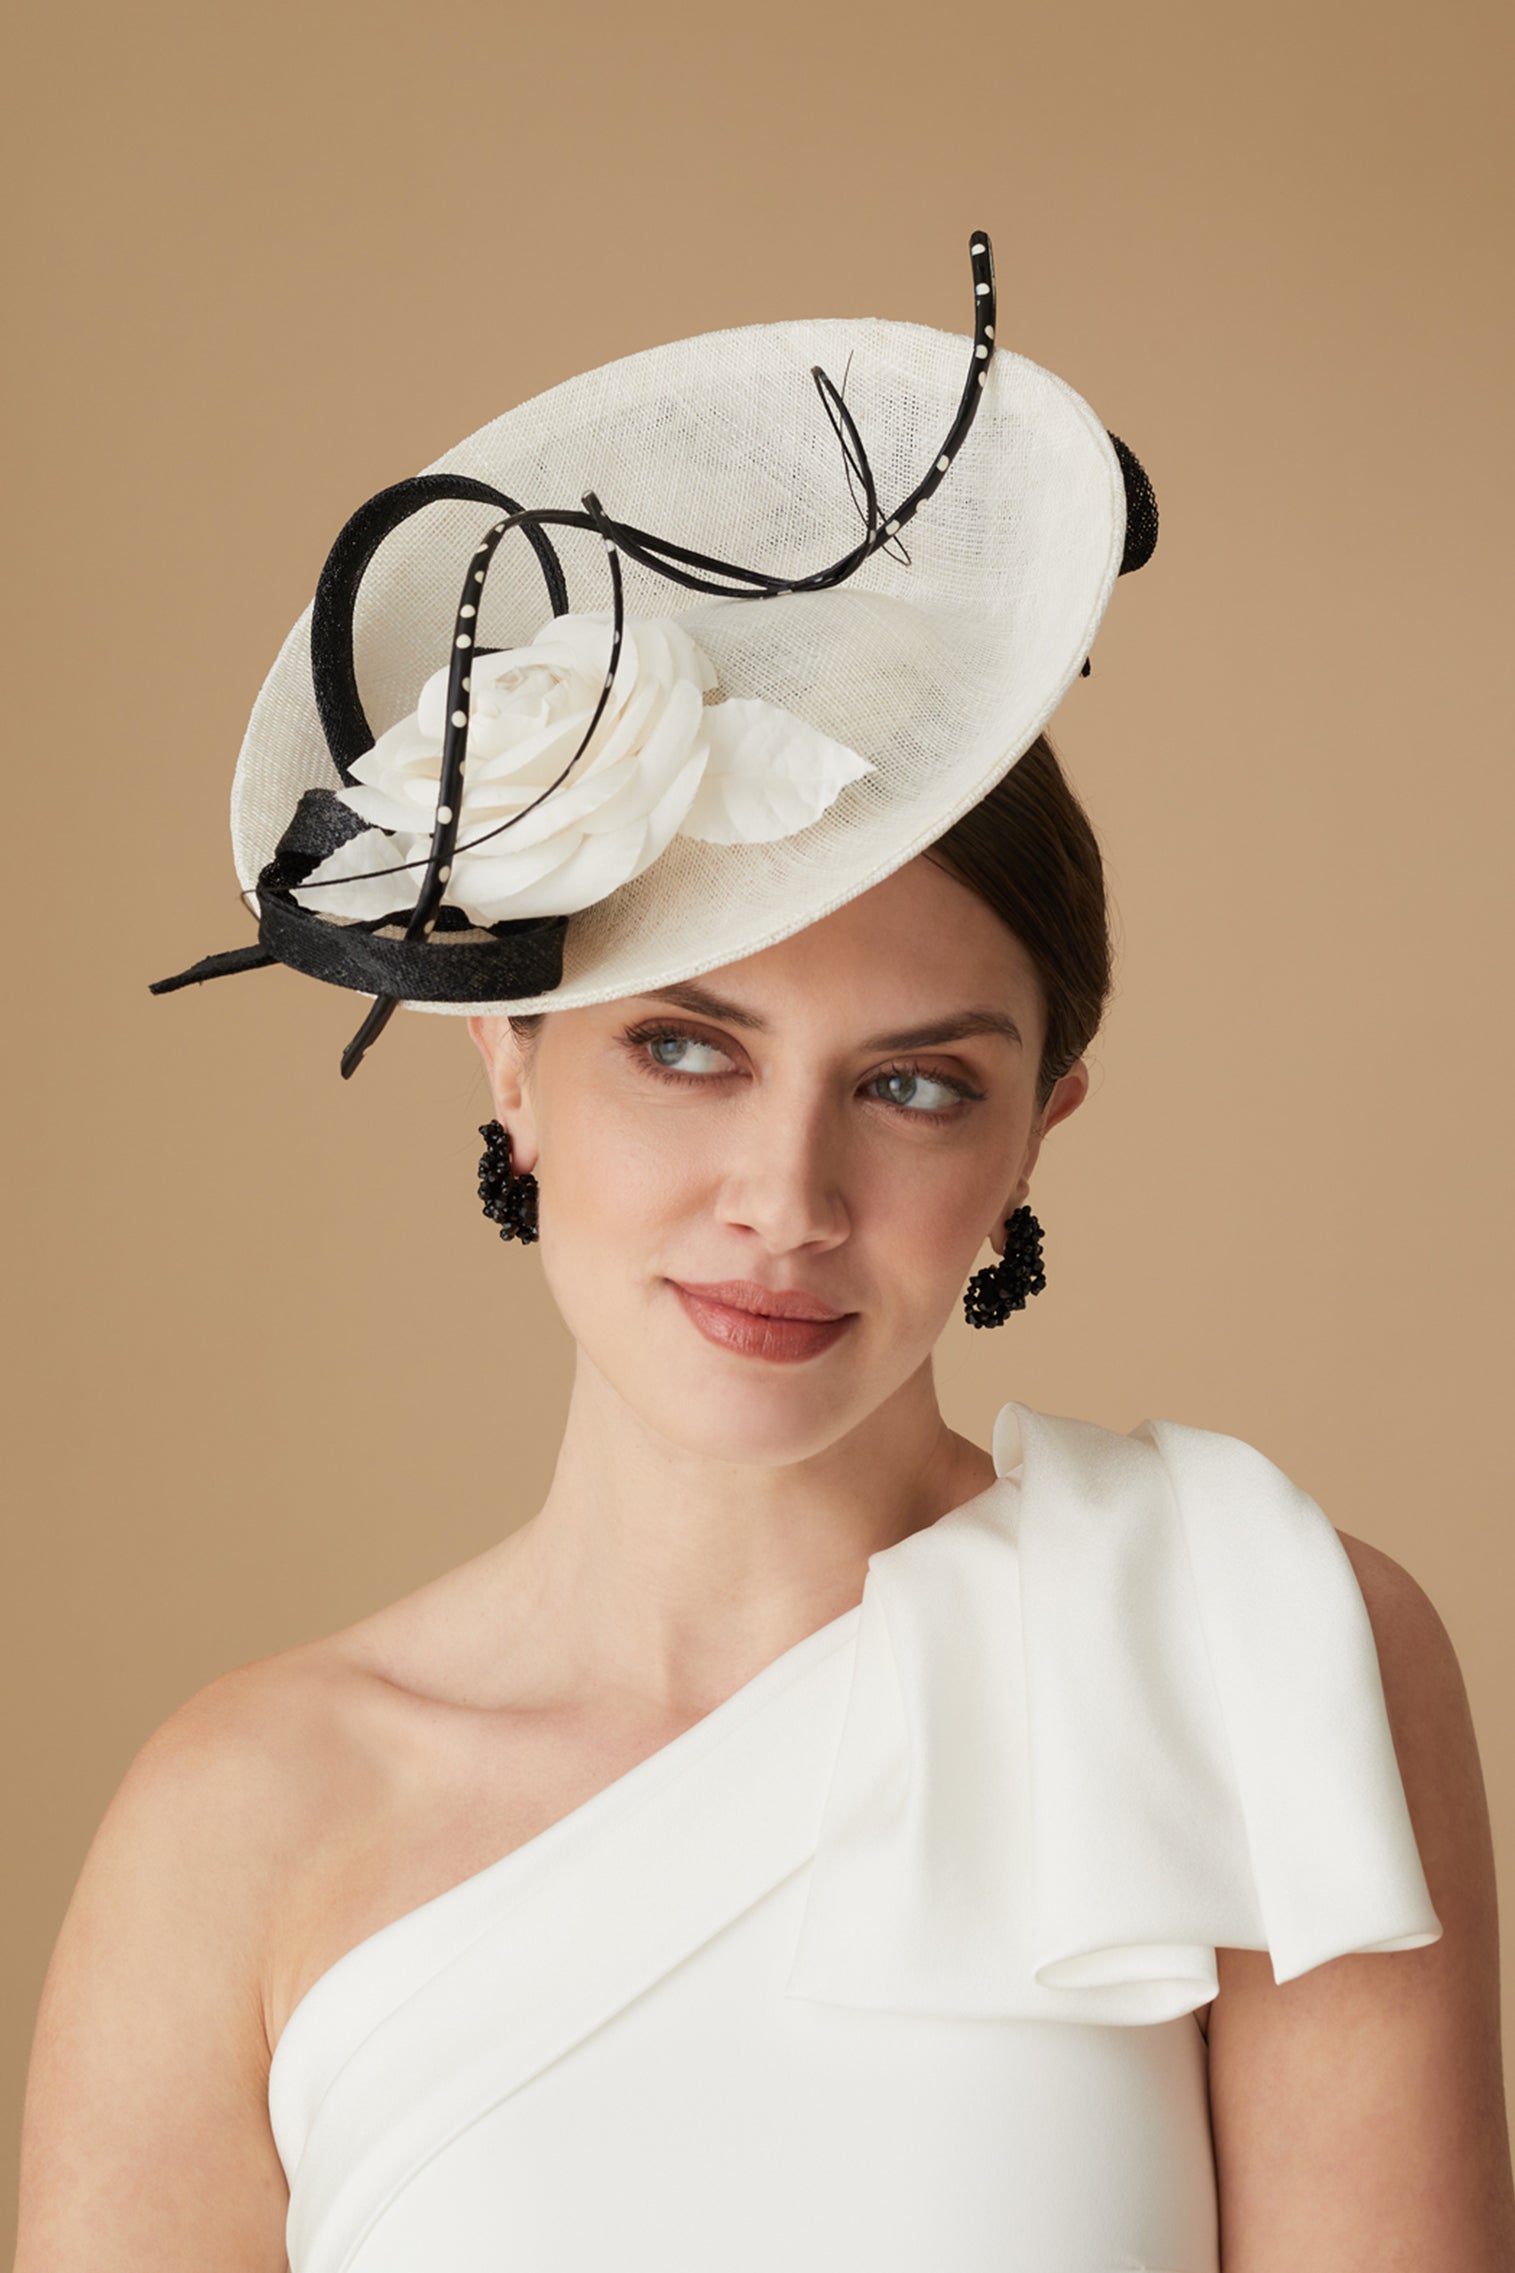 Assam White and Black Saucer Hat - Lock Couture by Awon Golding - Lock & Co. Hatters London UK